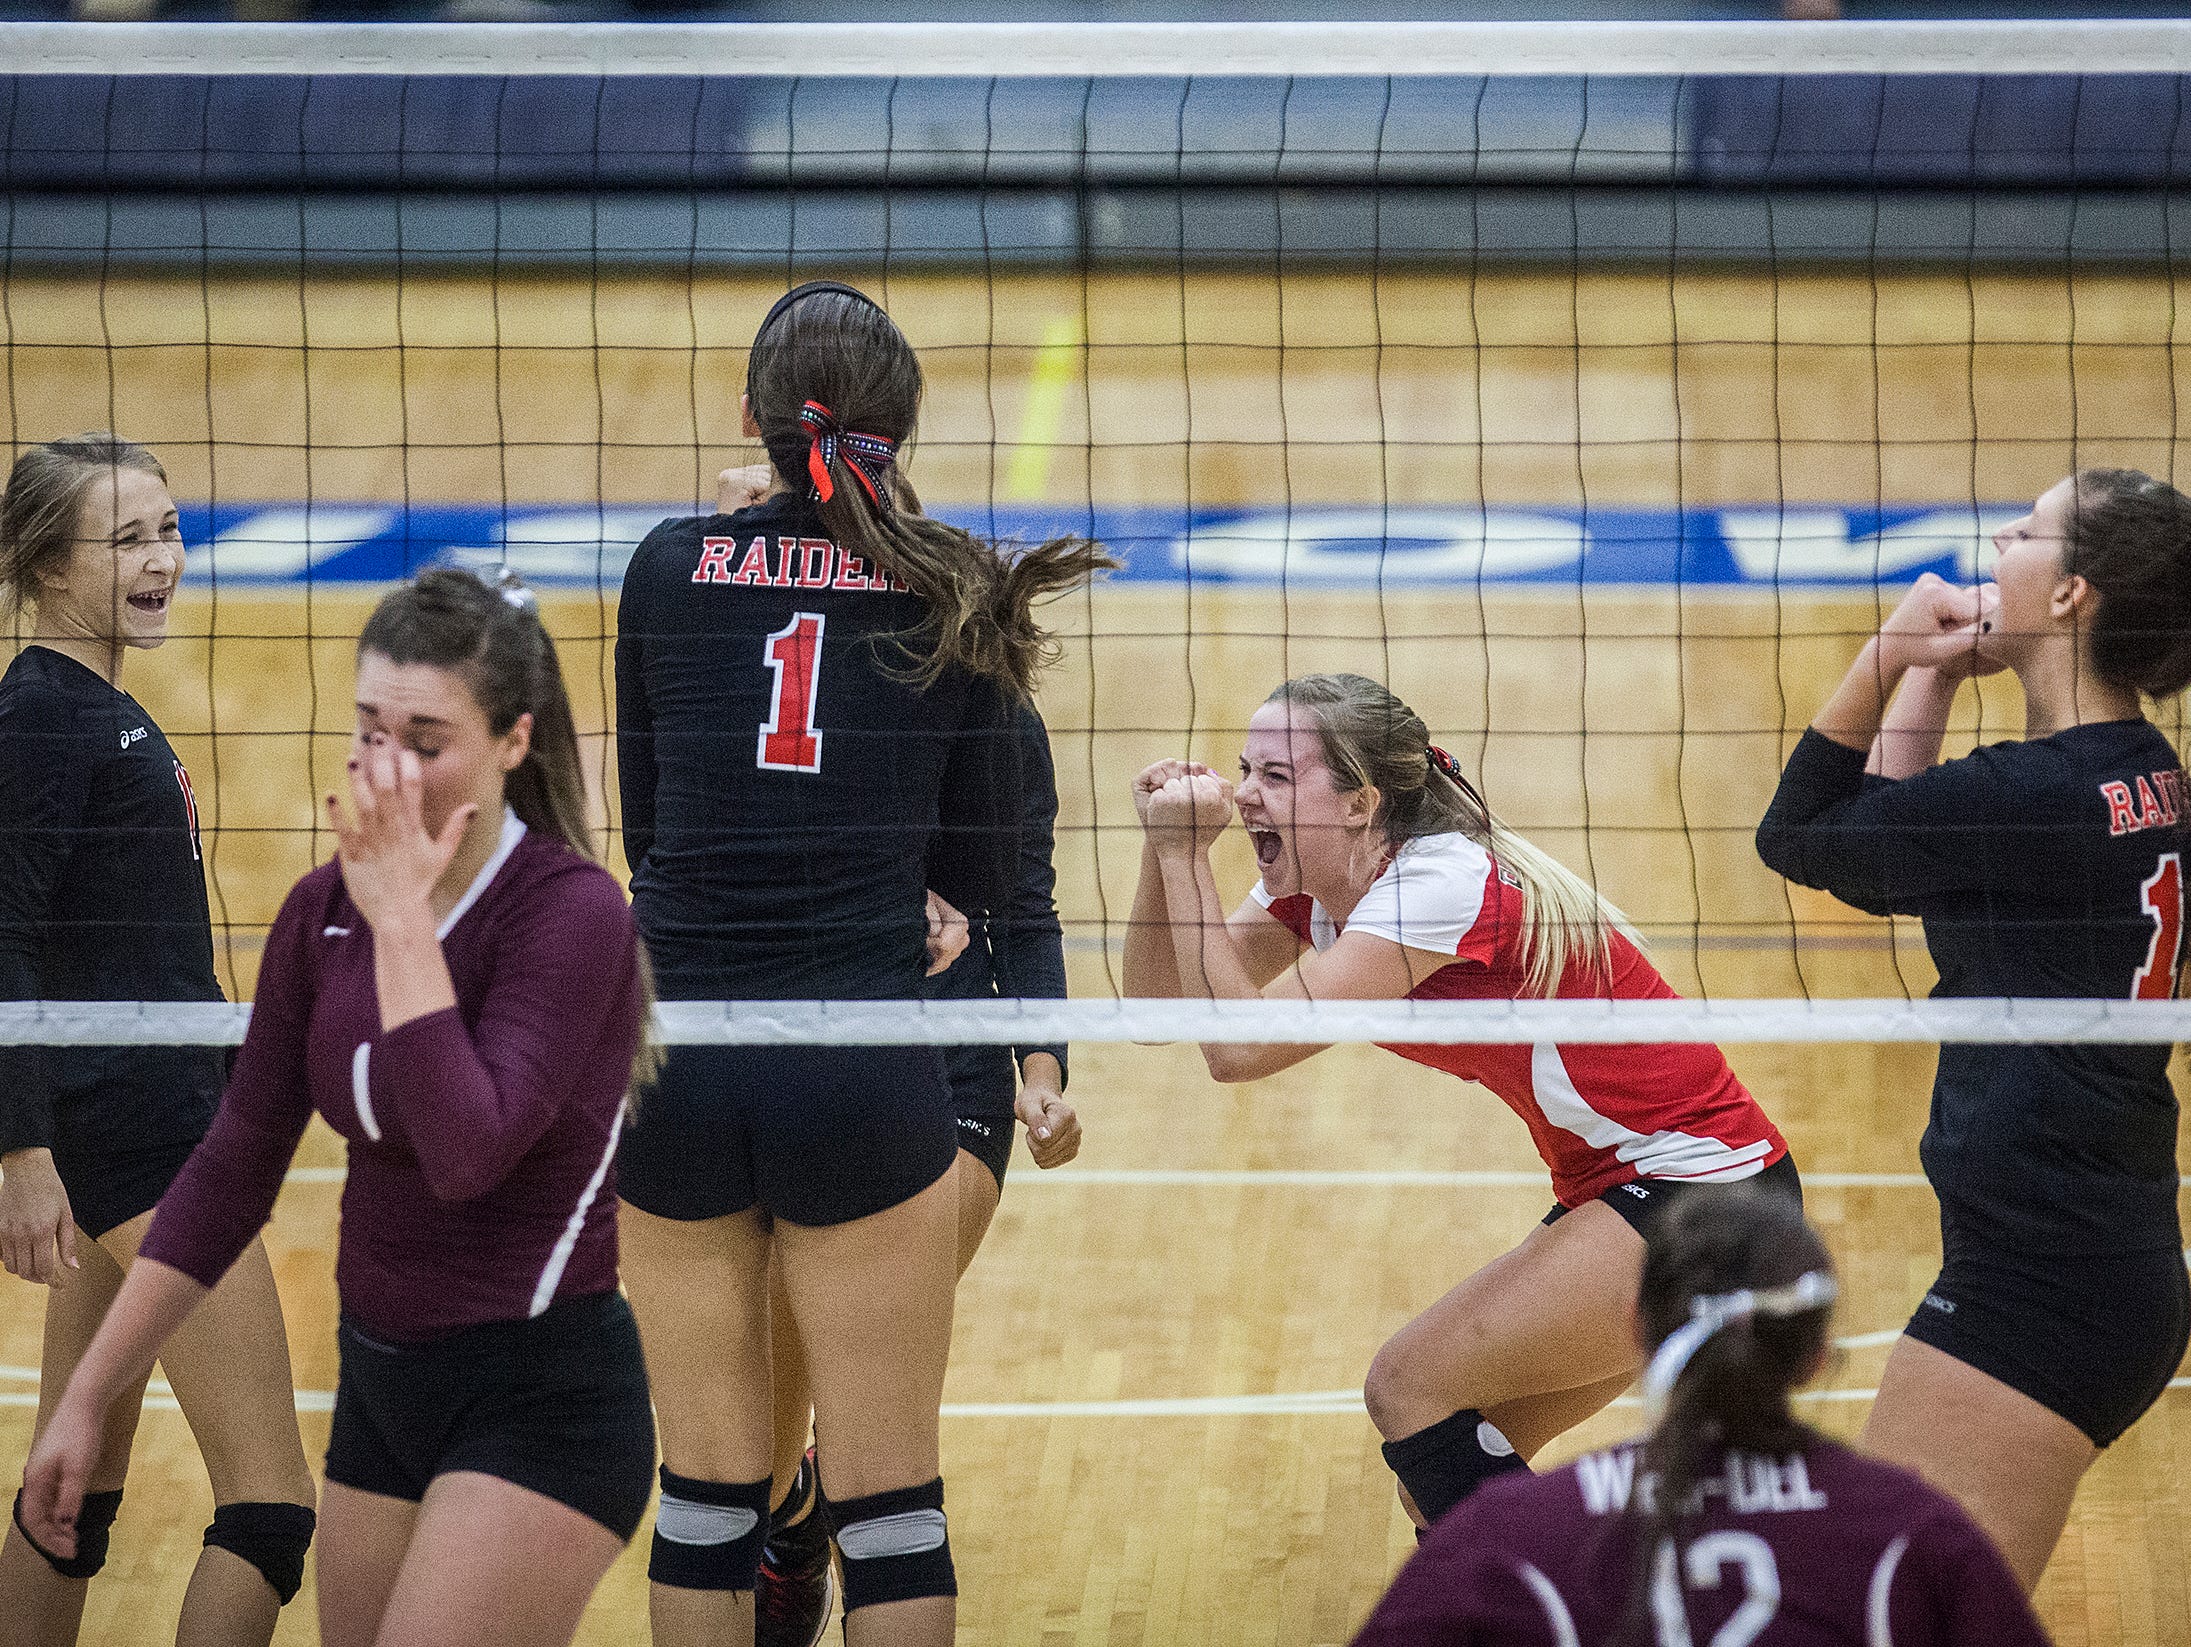 Wapahani celebrates a point against Wes-Del during their game at Ball Gymnasium Wednesday, Oct. 21, 2015.